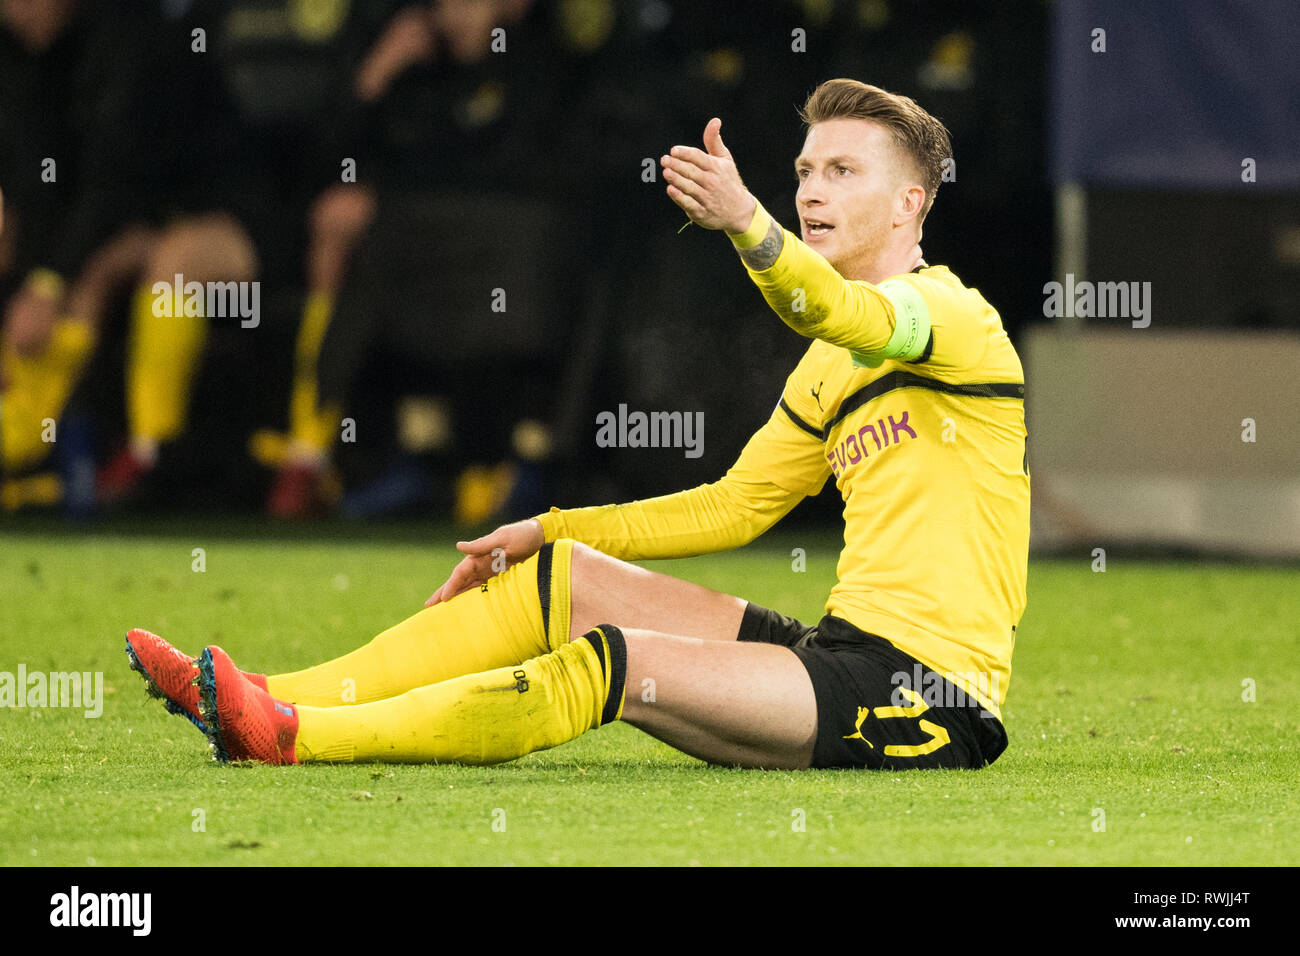 Marco REUS (DO) sits on the ground protesting angry, angry, waving, angry,  anger, frustrated, frustrated, latex, full figure, sitting, Soccer  Champions League, Round of 16, Borussia Dortmund (DO) - Tottenham Hotspur  (Spurs)